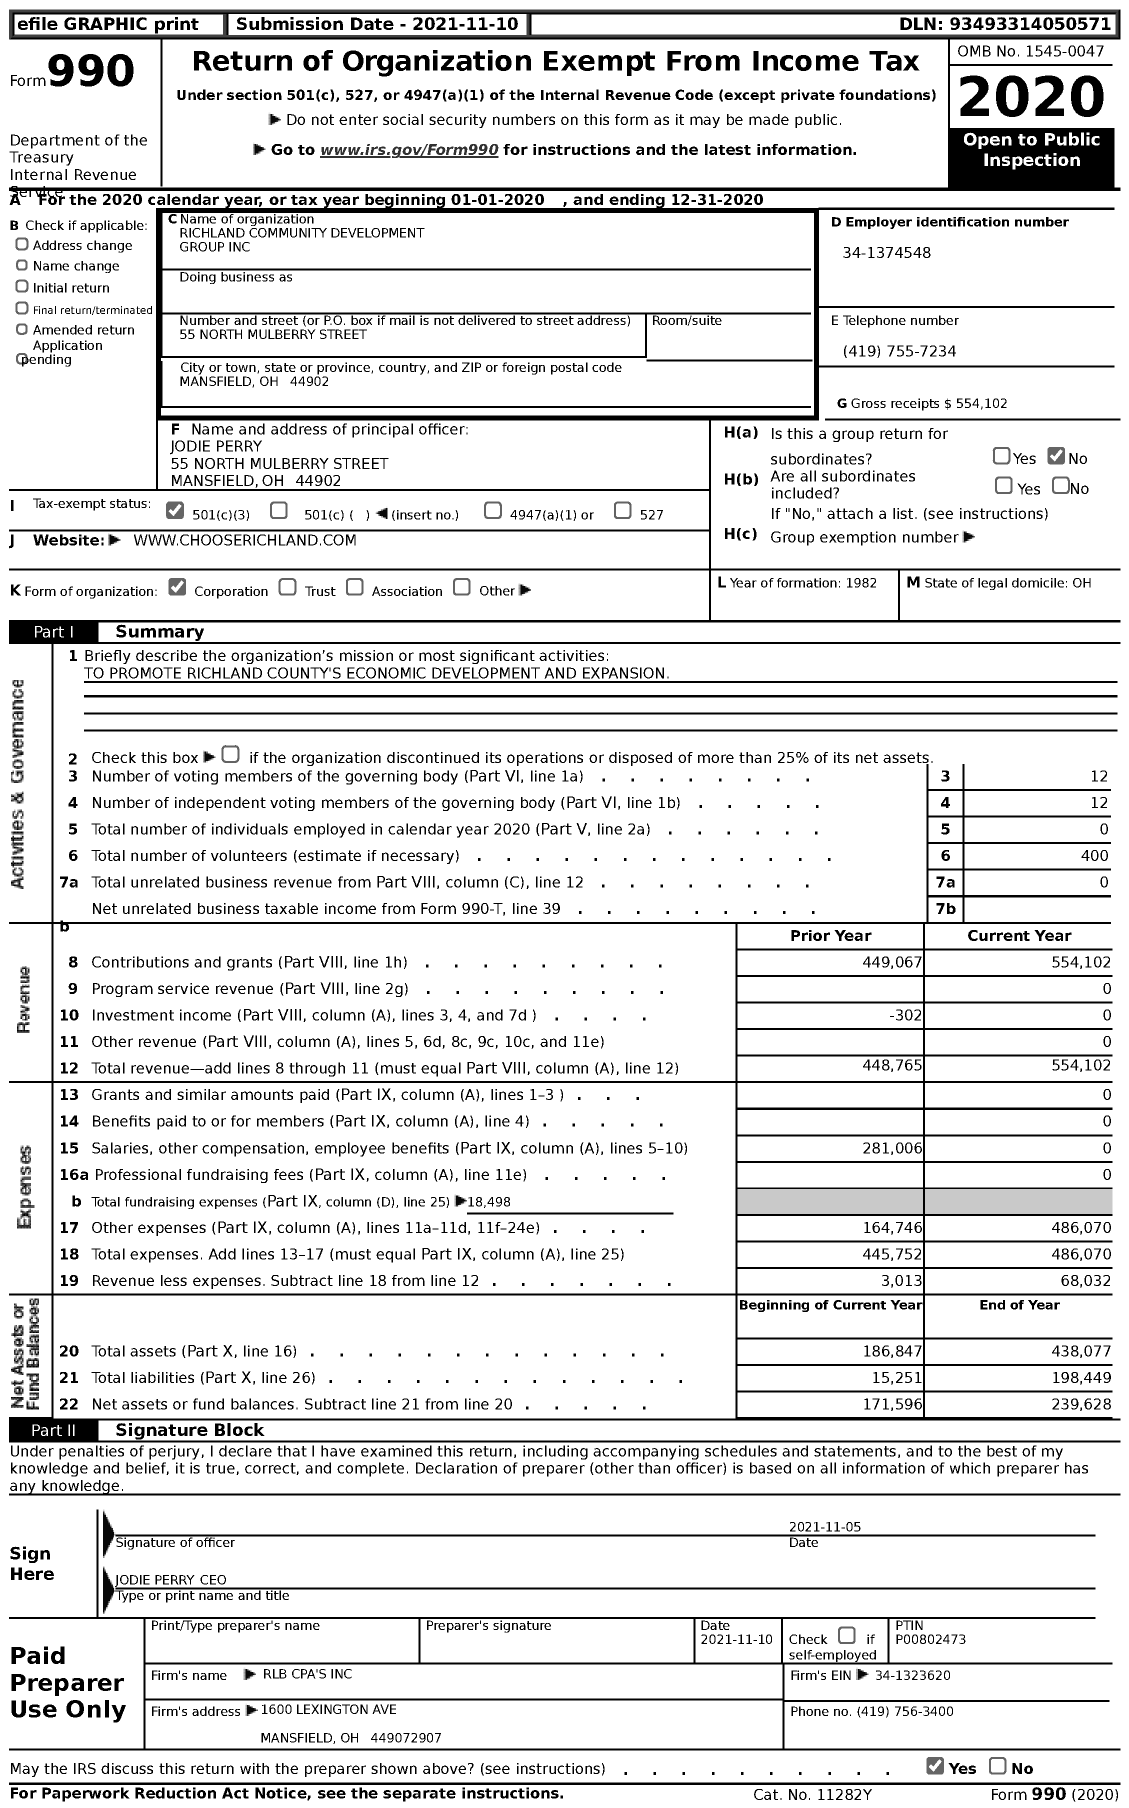 Image of first page of 2020 Form 990 for Richland Community Development Group